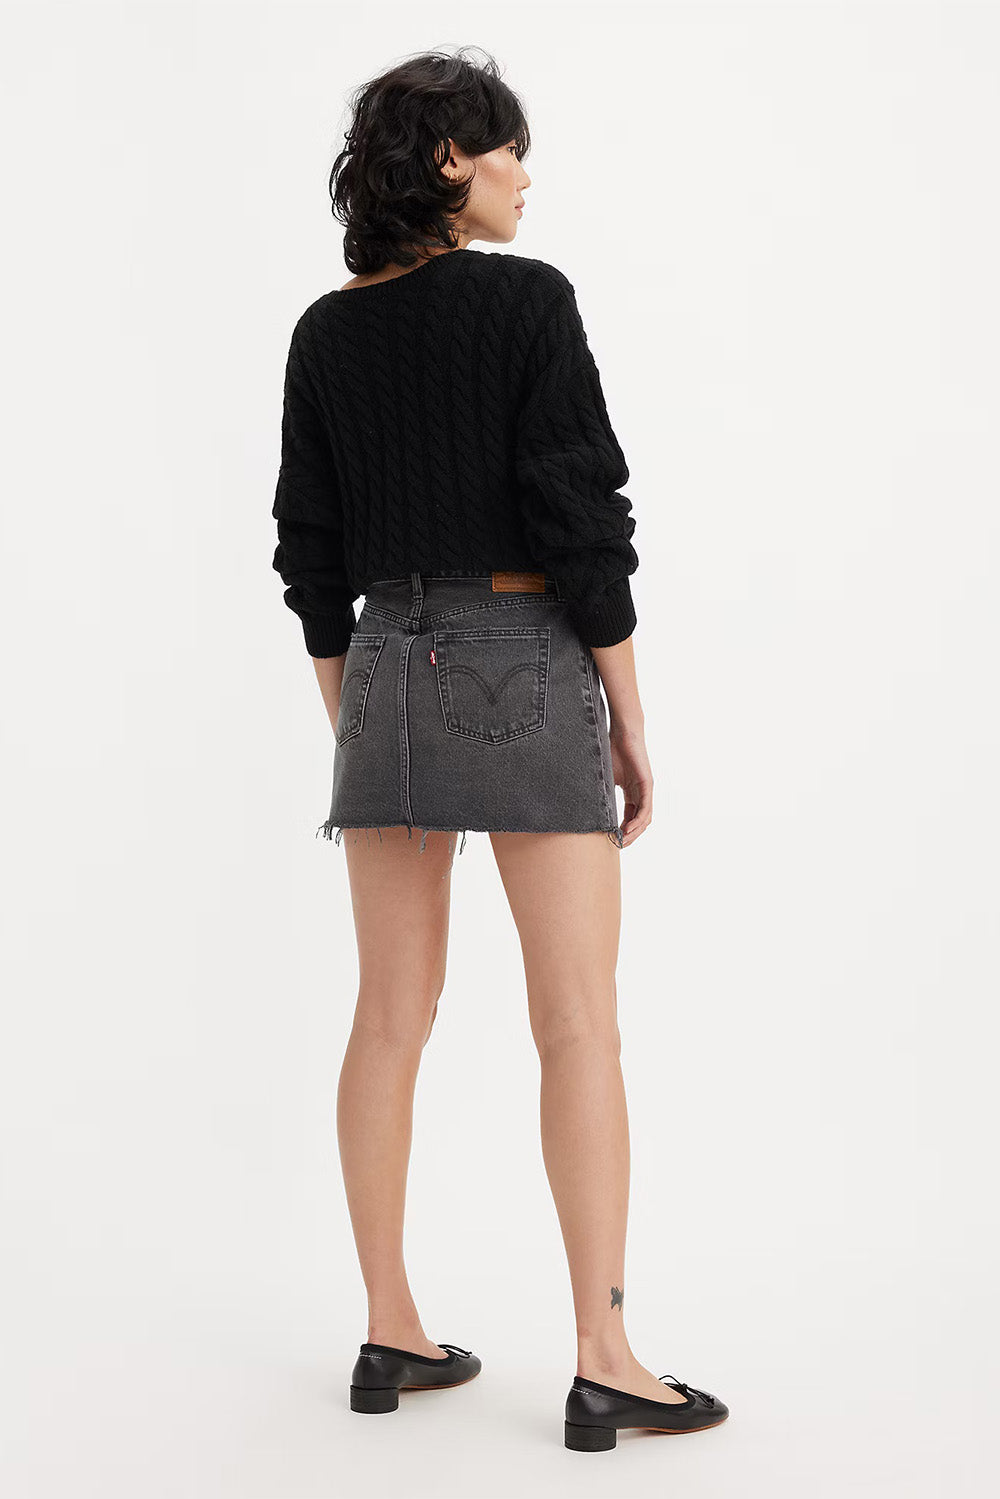 Levis - Icon Skirt - Fifth Dimension - Back